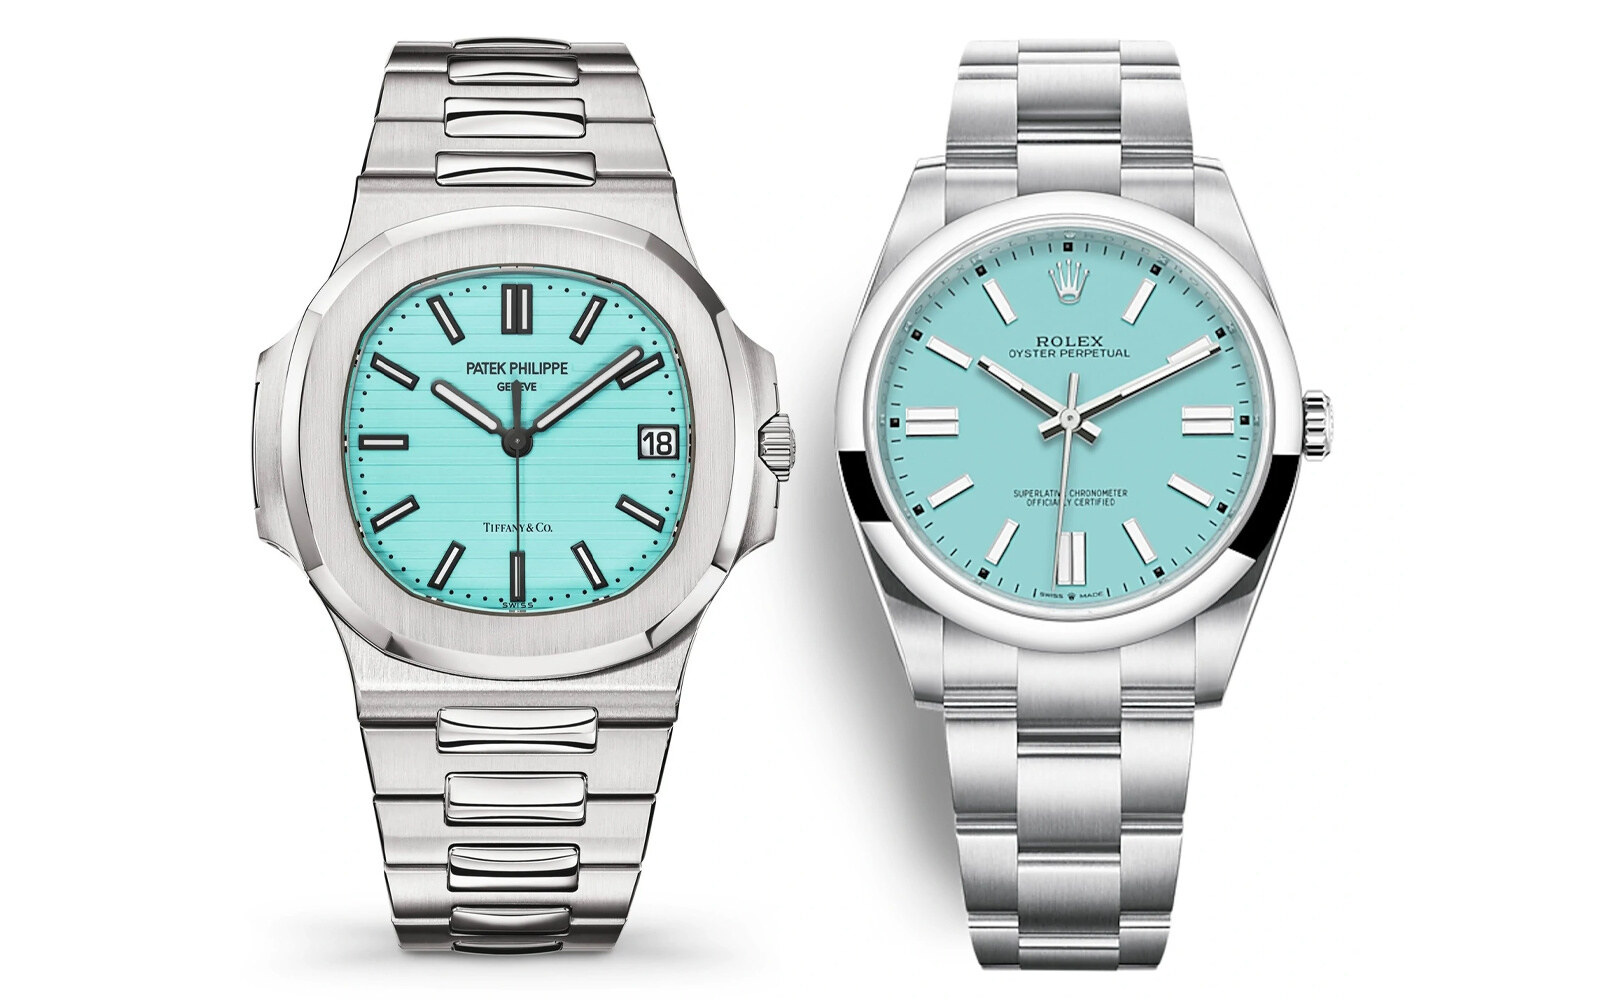 Tiffany x Patek Philippe e Rolex Oyster Perpetual Turquoise